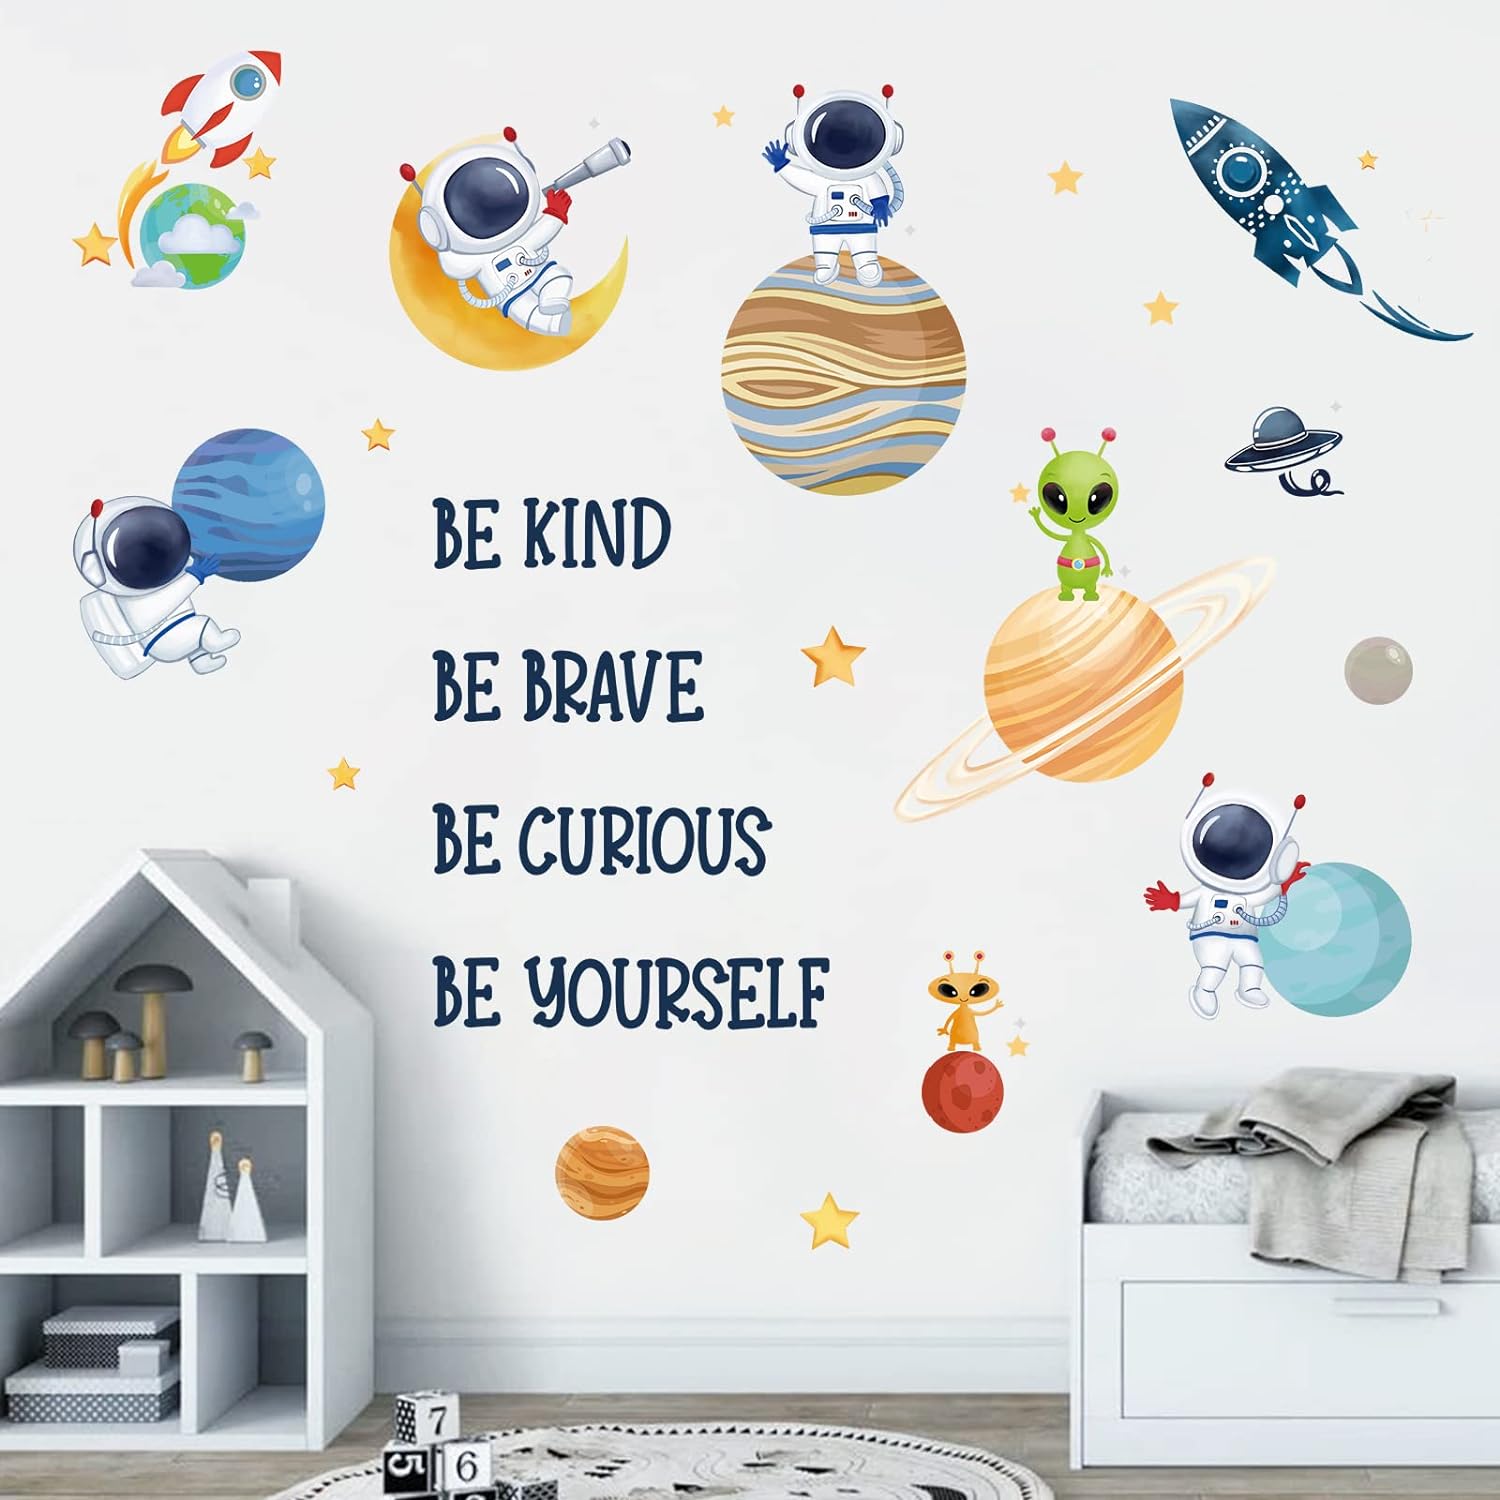 wondever Planets Outer Space Wall Stickers Be Kind Be Brave Inspirational Quote Astronaut Peel and Stick Wall Art Decals for Baby Nursery Kids Bedroom Playroom